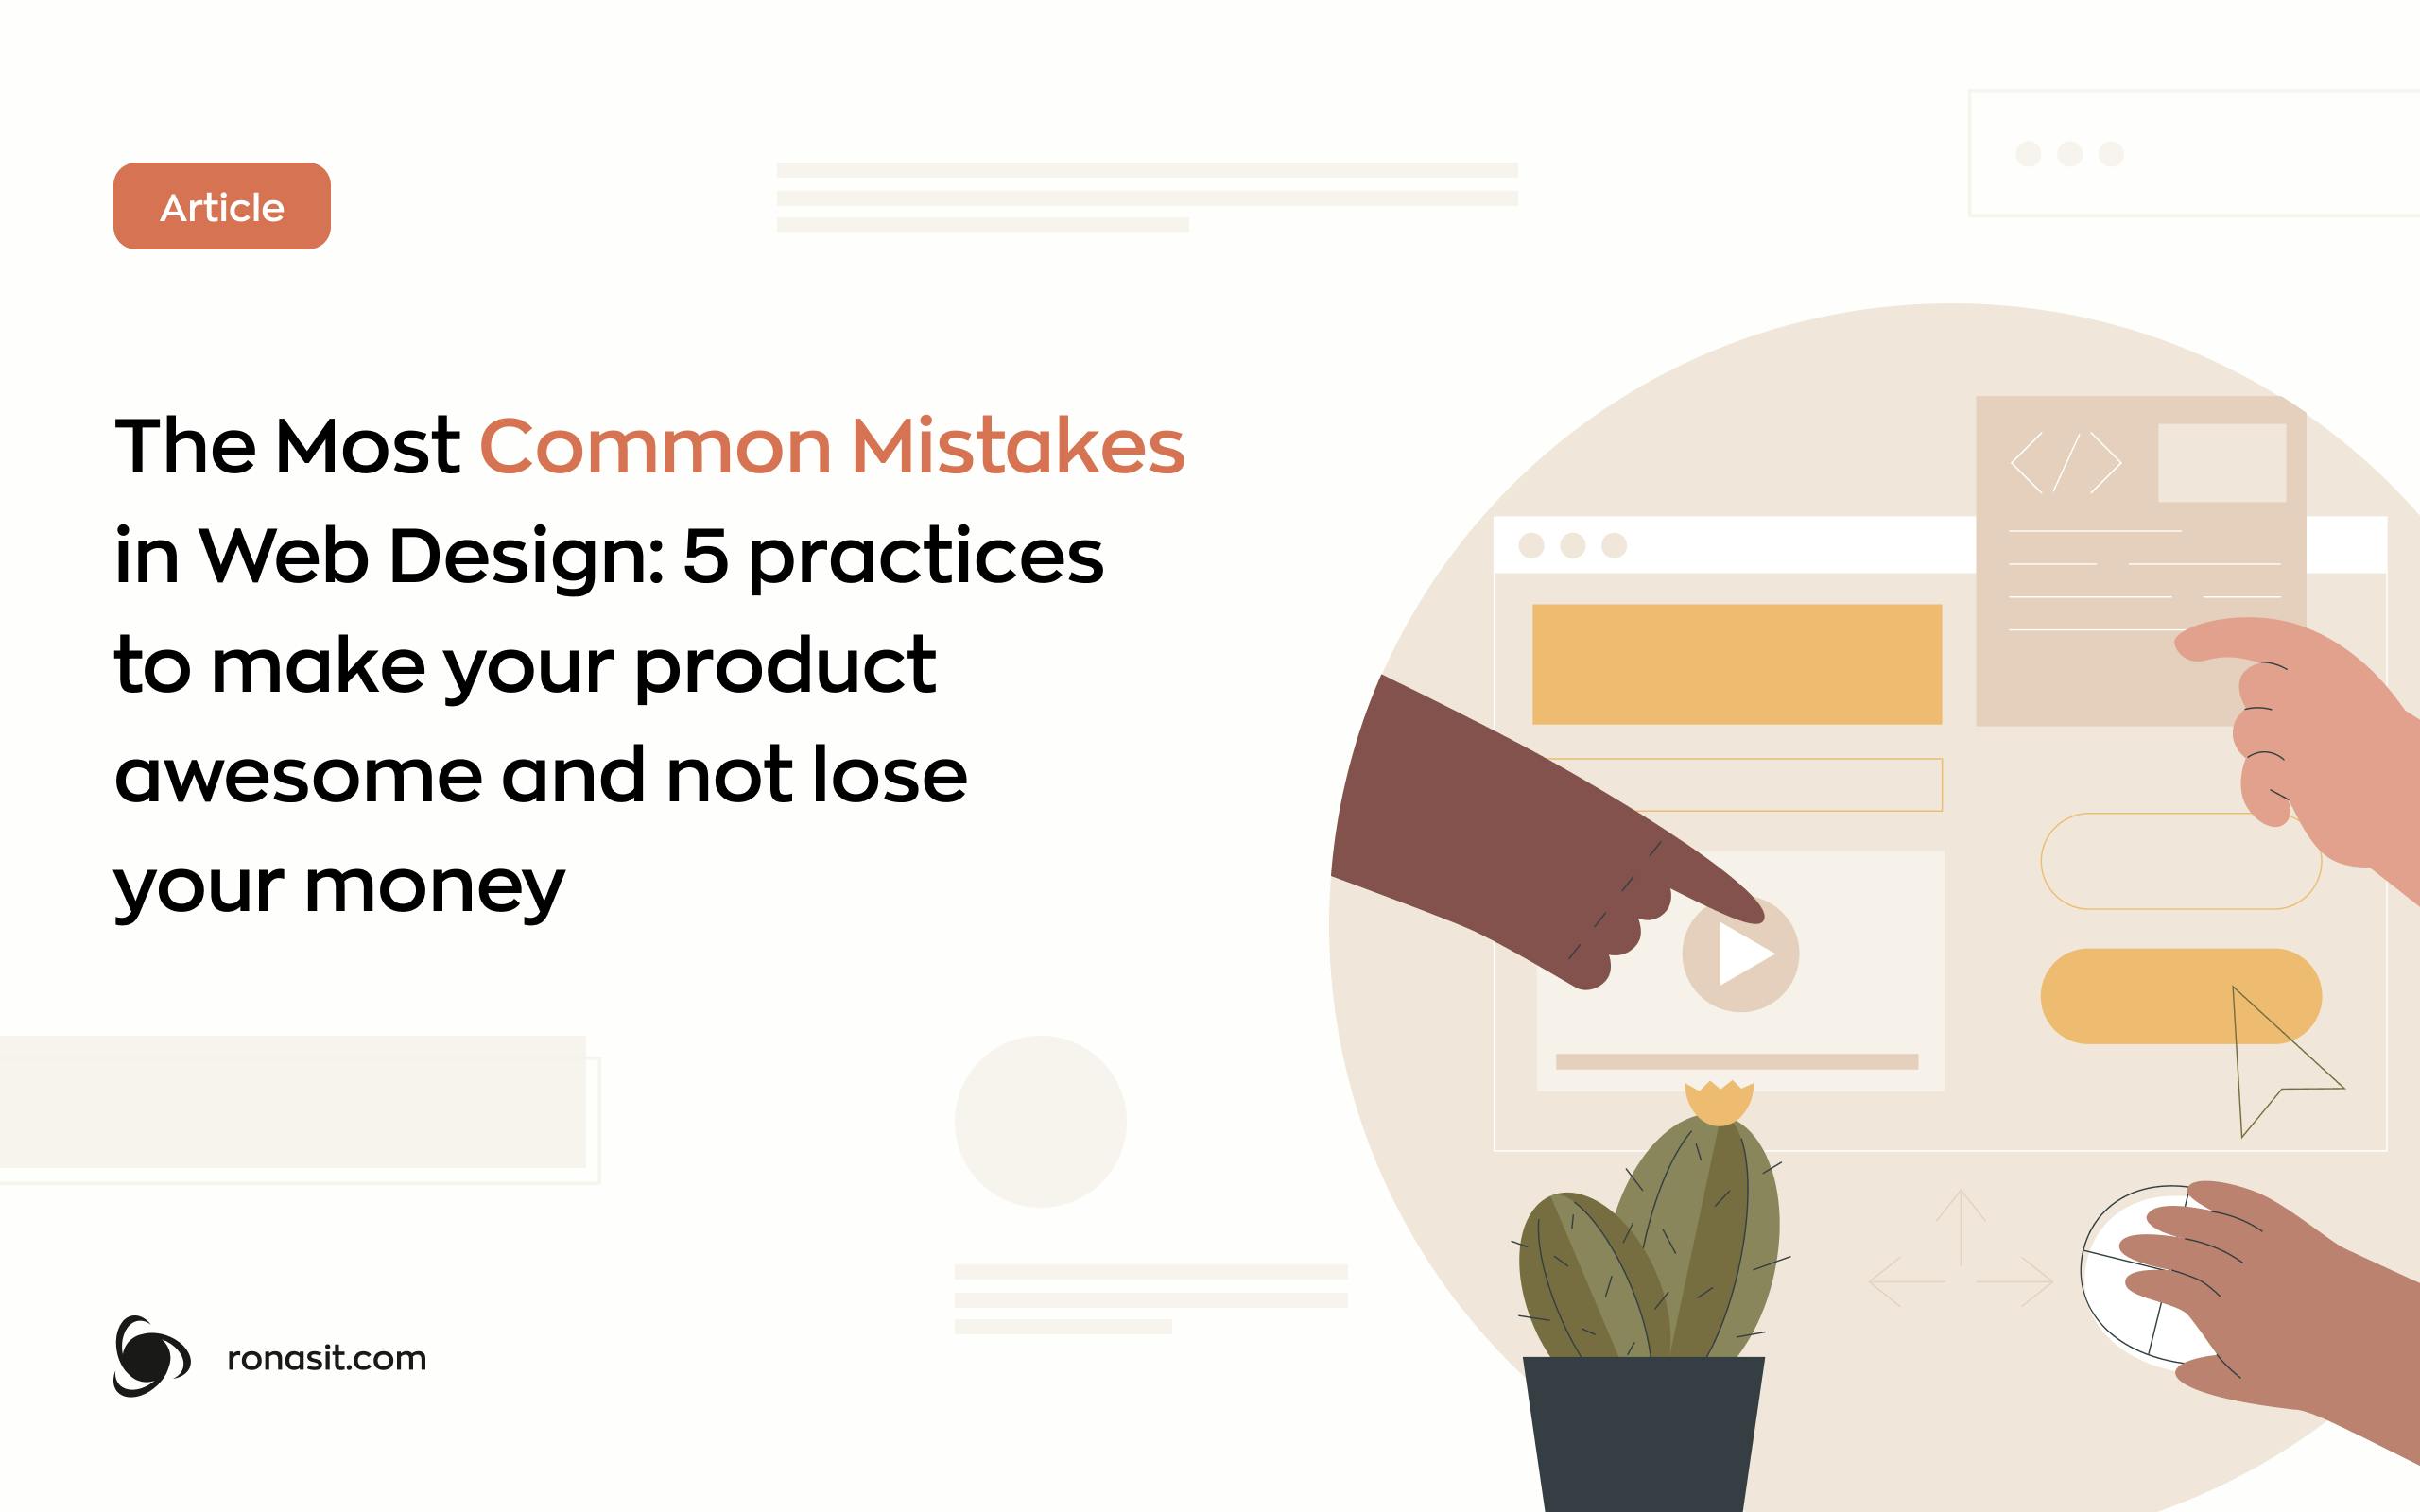 The most common mistakes in web design